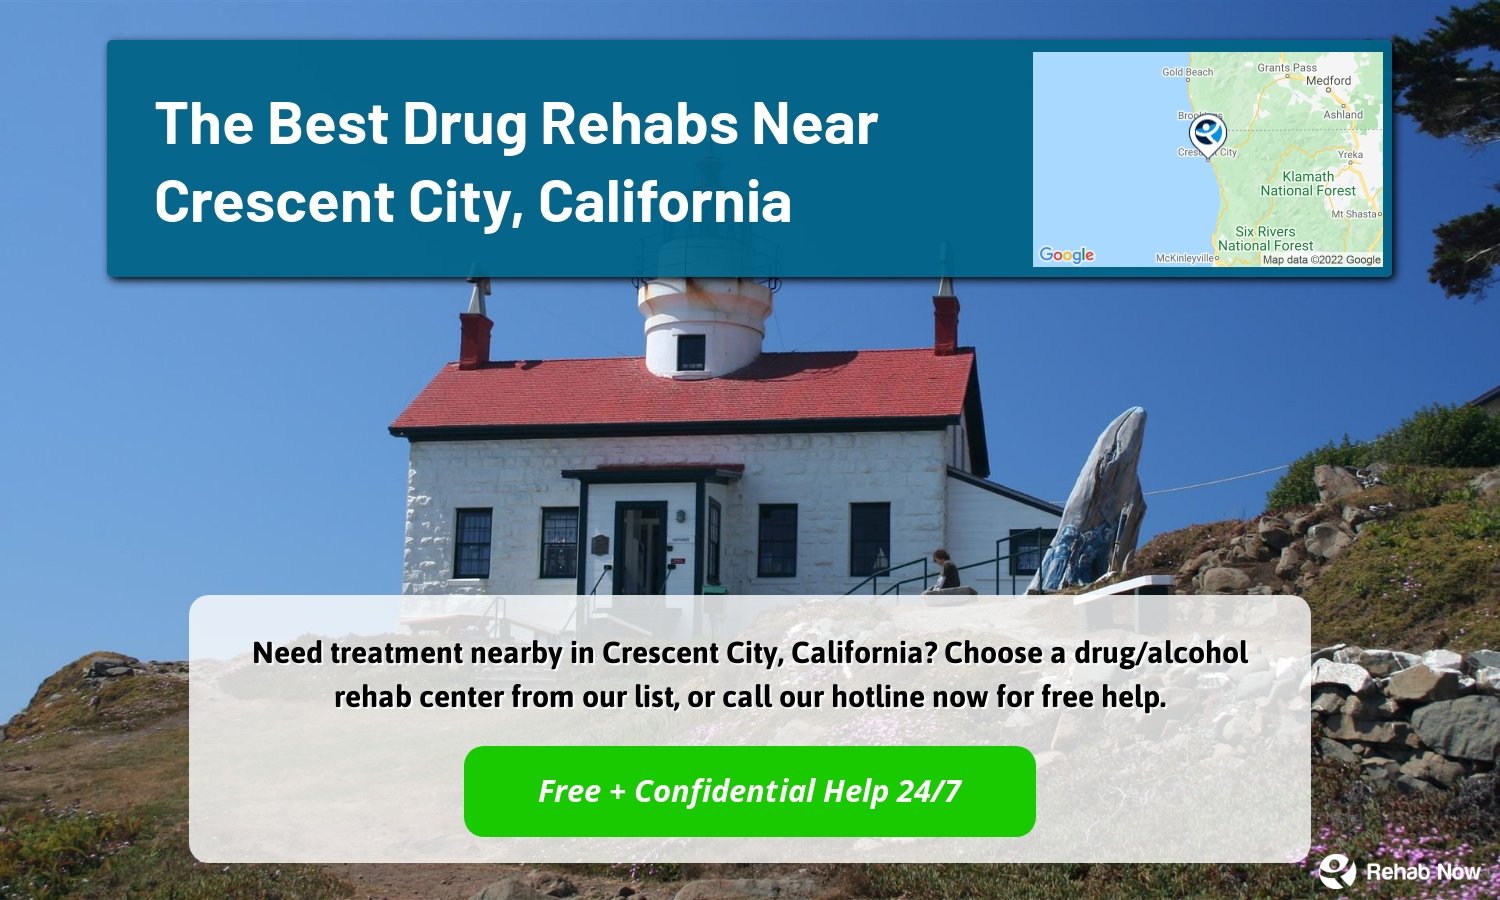 Need treatment nearby in Crescent City, California? Choose a drug/alcohol rehab center from our list, or call our hotline now for free help.